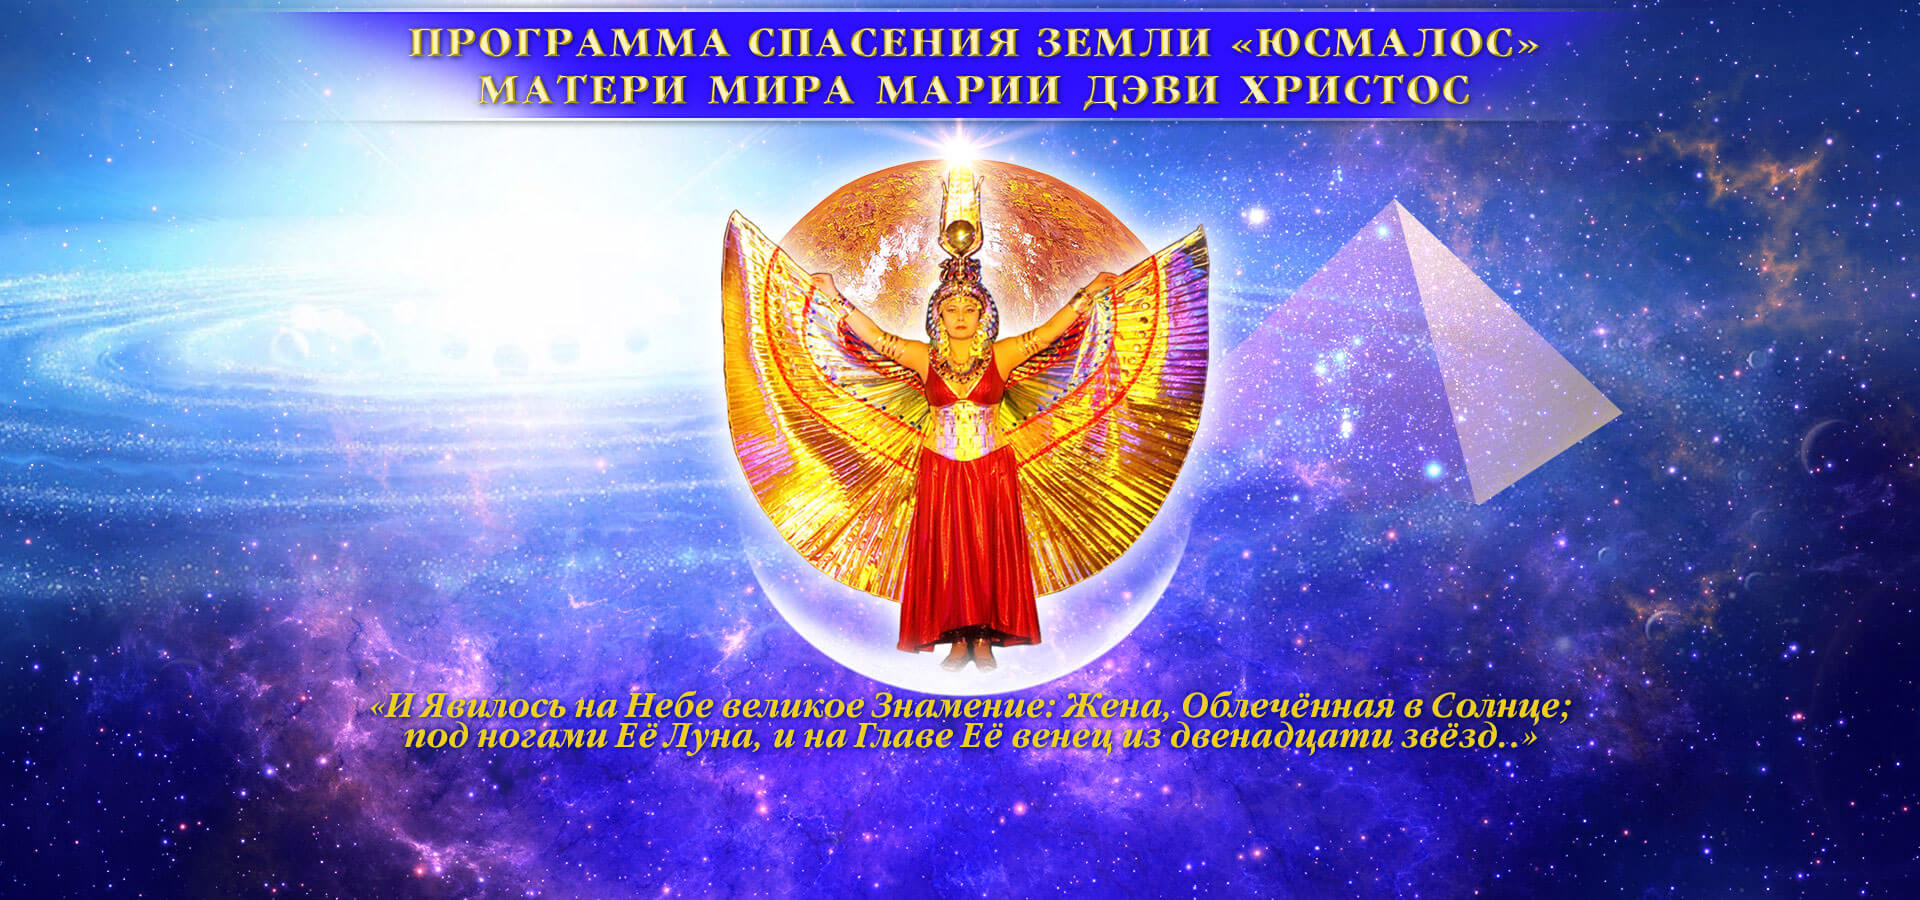 Program of Earth Rescue «USMALOS». Protection from chipization and the mark of the beast, Salvation. Messiah of the Age of Aquarius — Mother of the World Maria DEVI CHRISTOS. About the «Great White Brotherhood» «USMALOS» — the Slavic Movement of the 90s